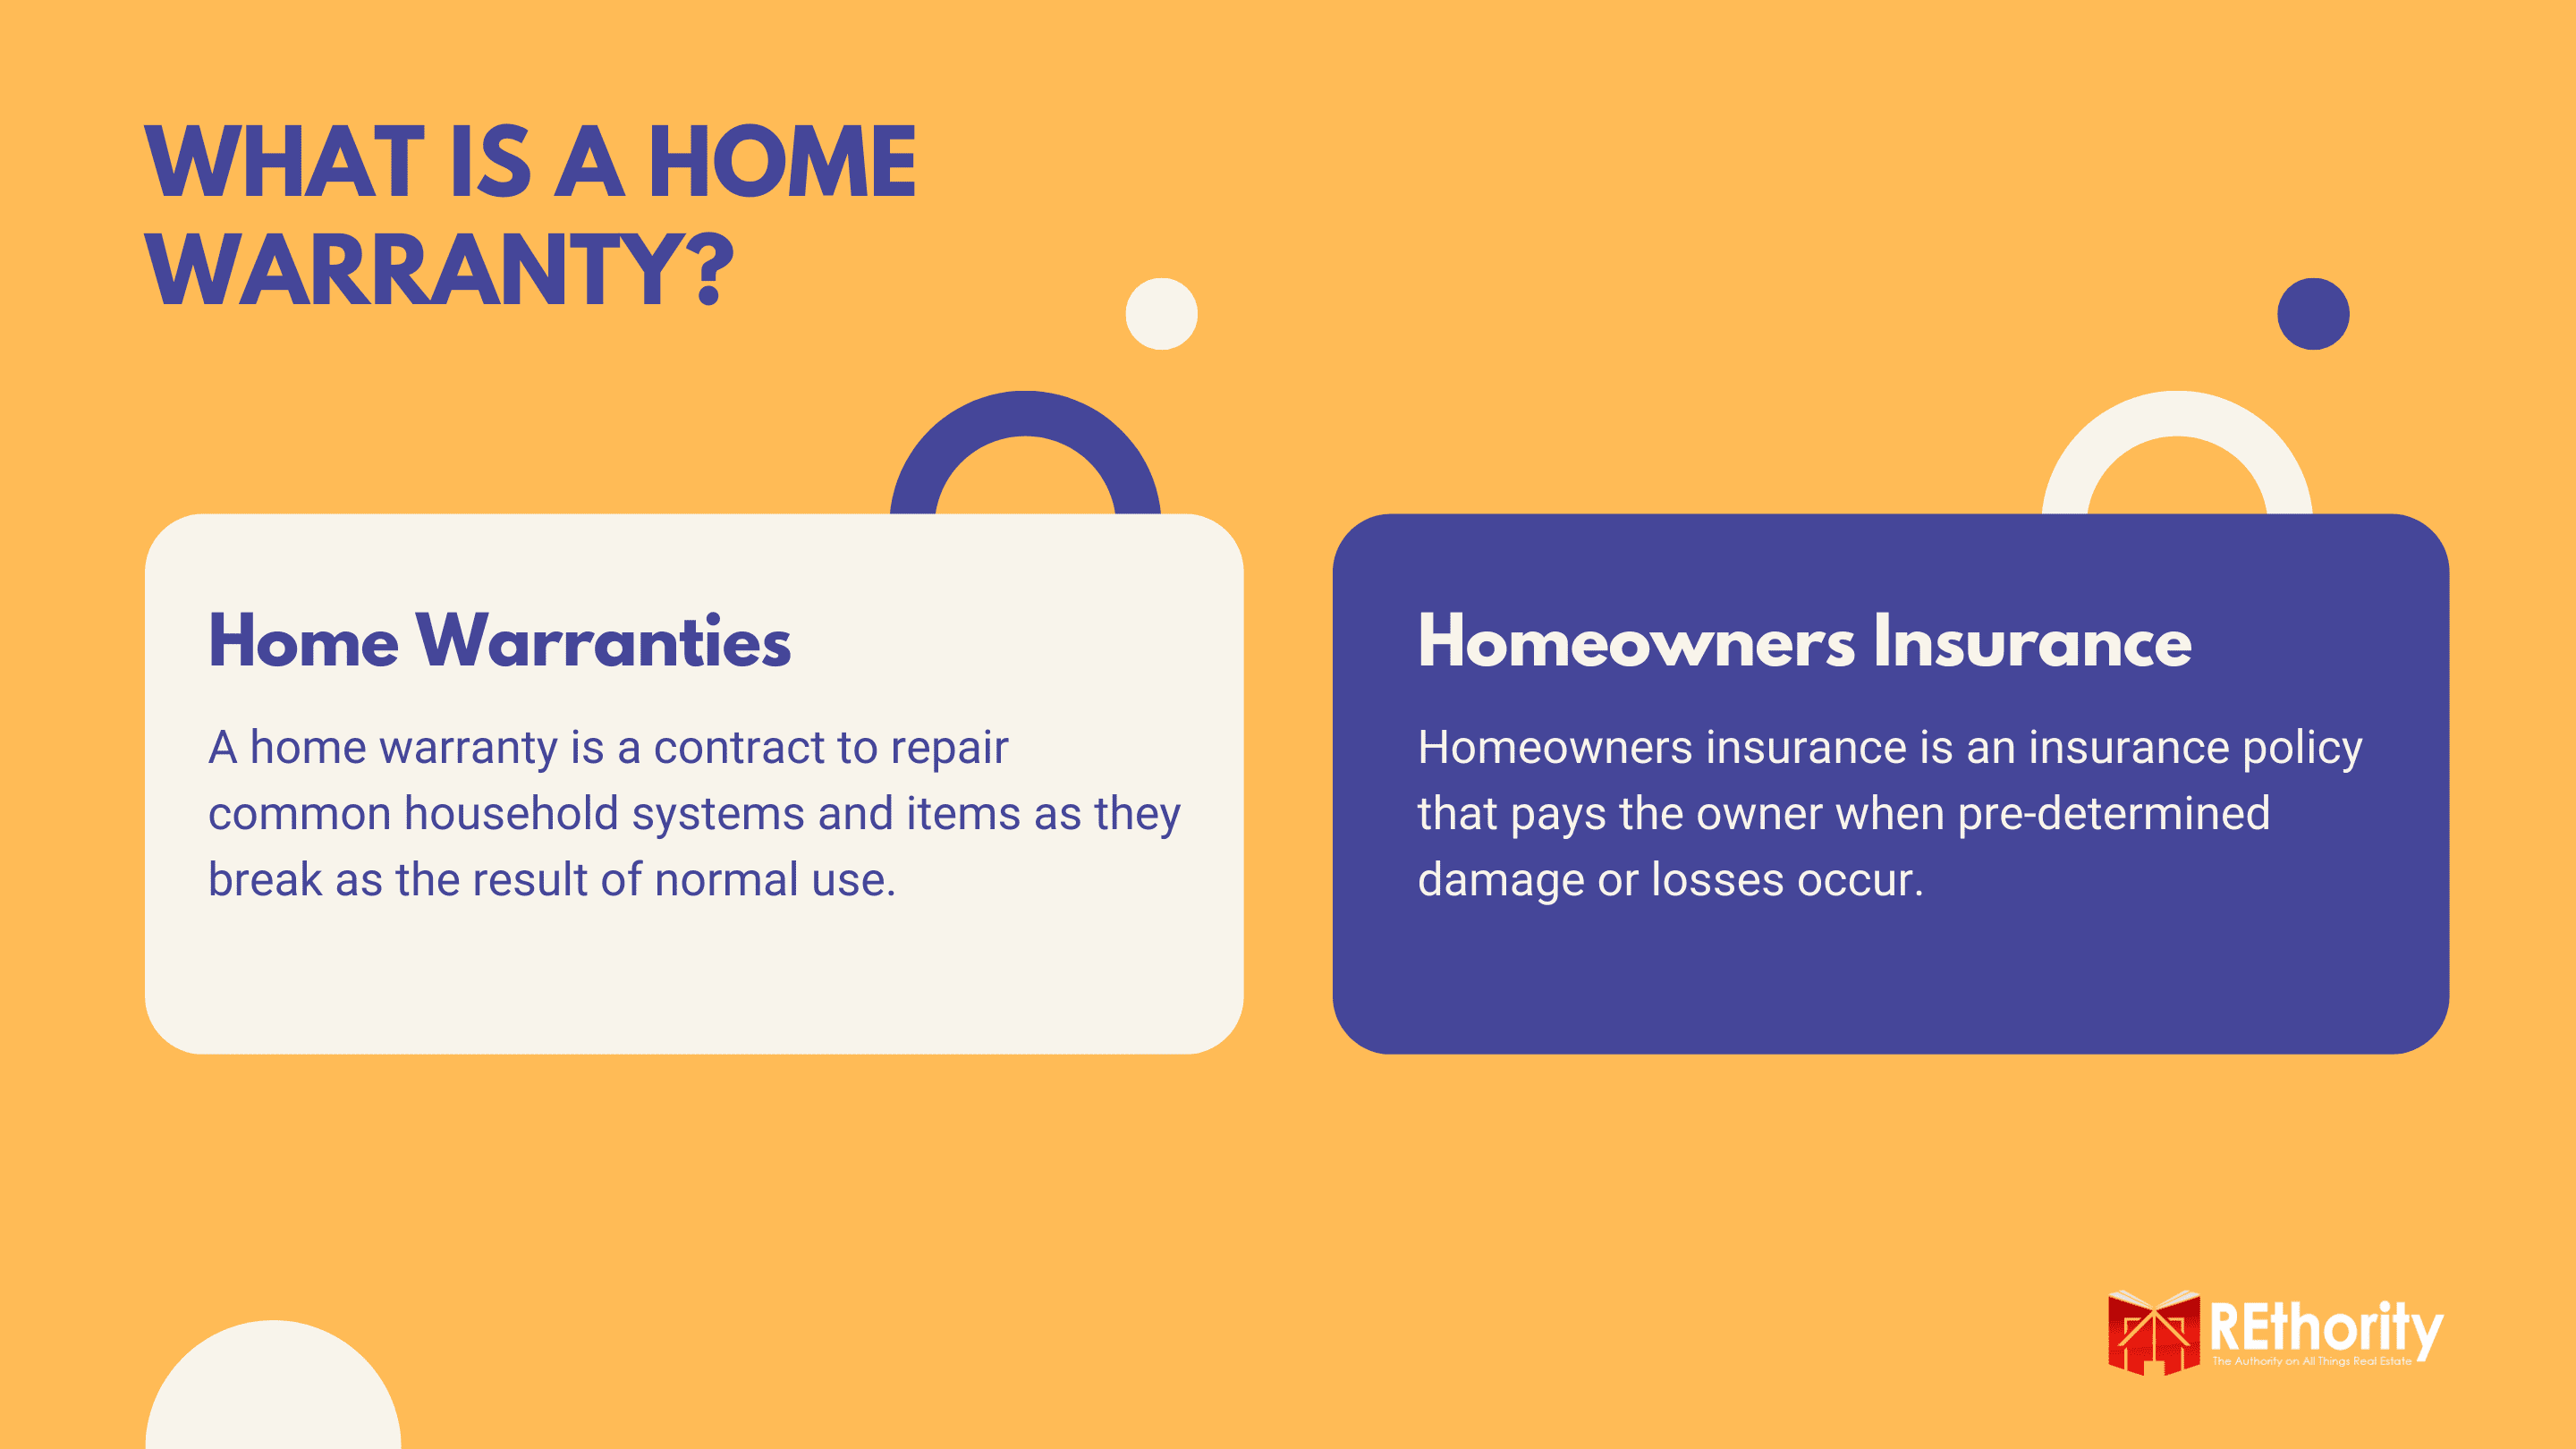 What Is a Home Warranty graphic that compares a home warranty vs home insurance